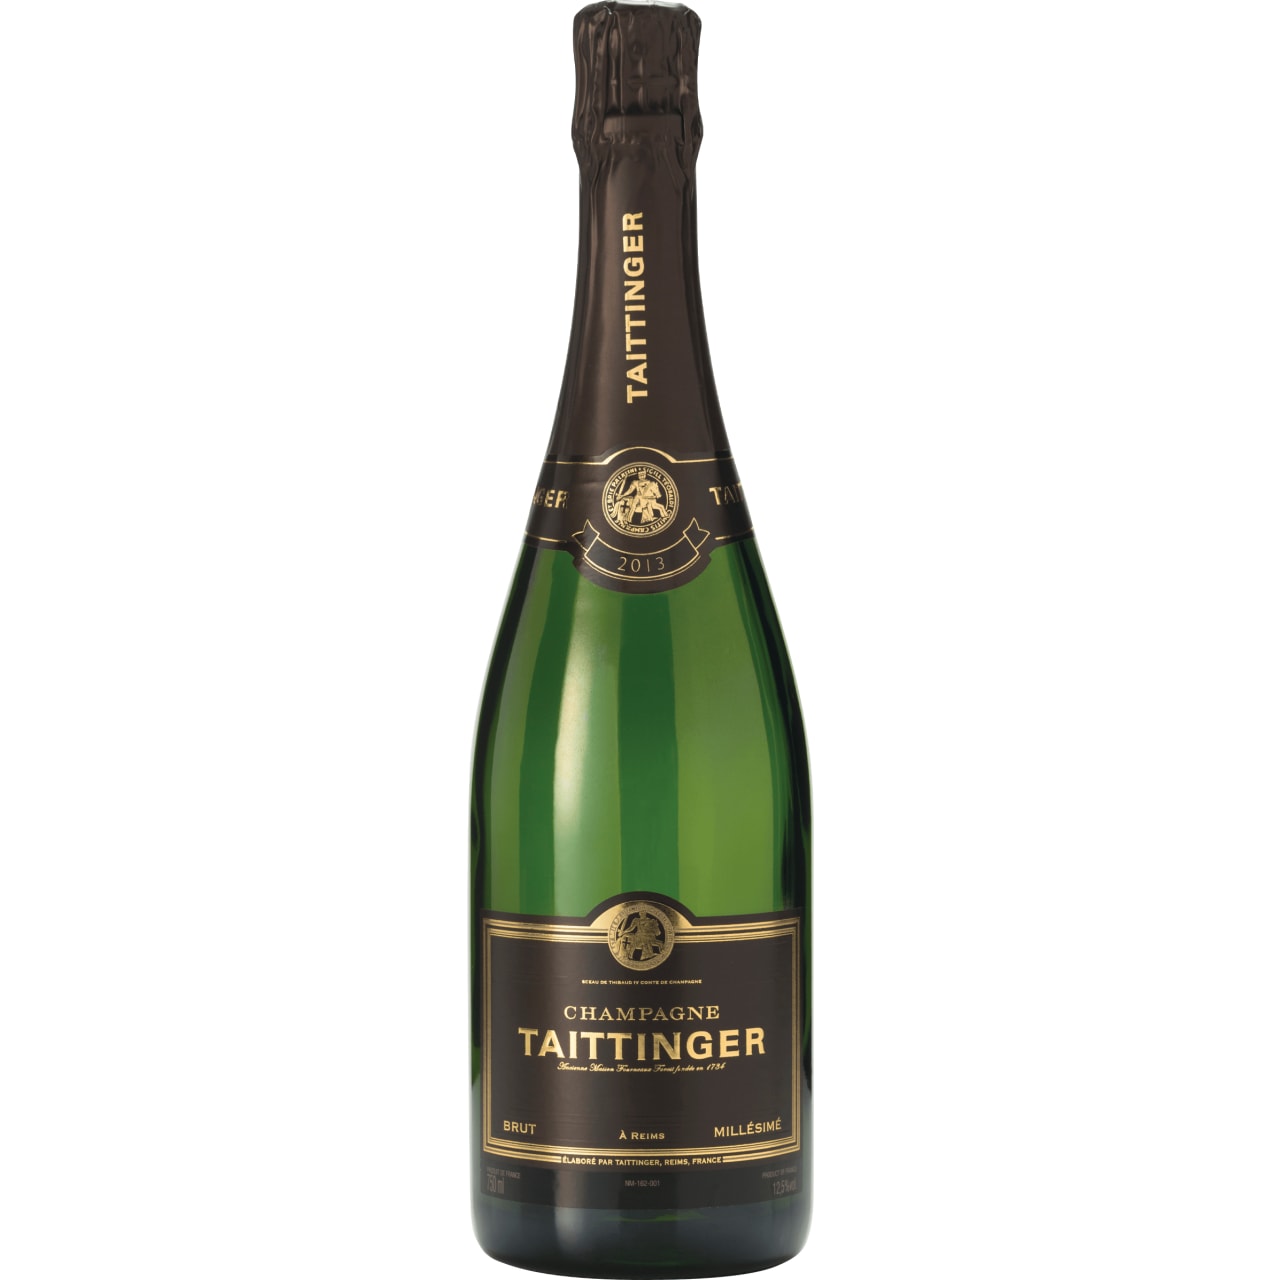 A rich blend of Chardonnay and Pinot Noir, this Champagne offers notes of buttery pastry, soft peaches, red apples and white flowers.